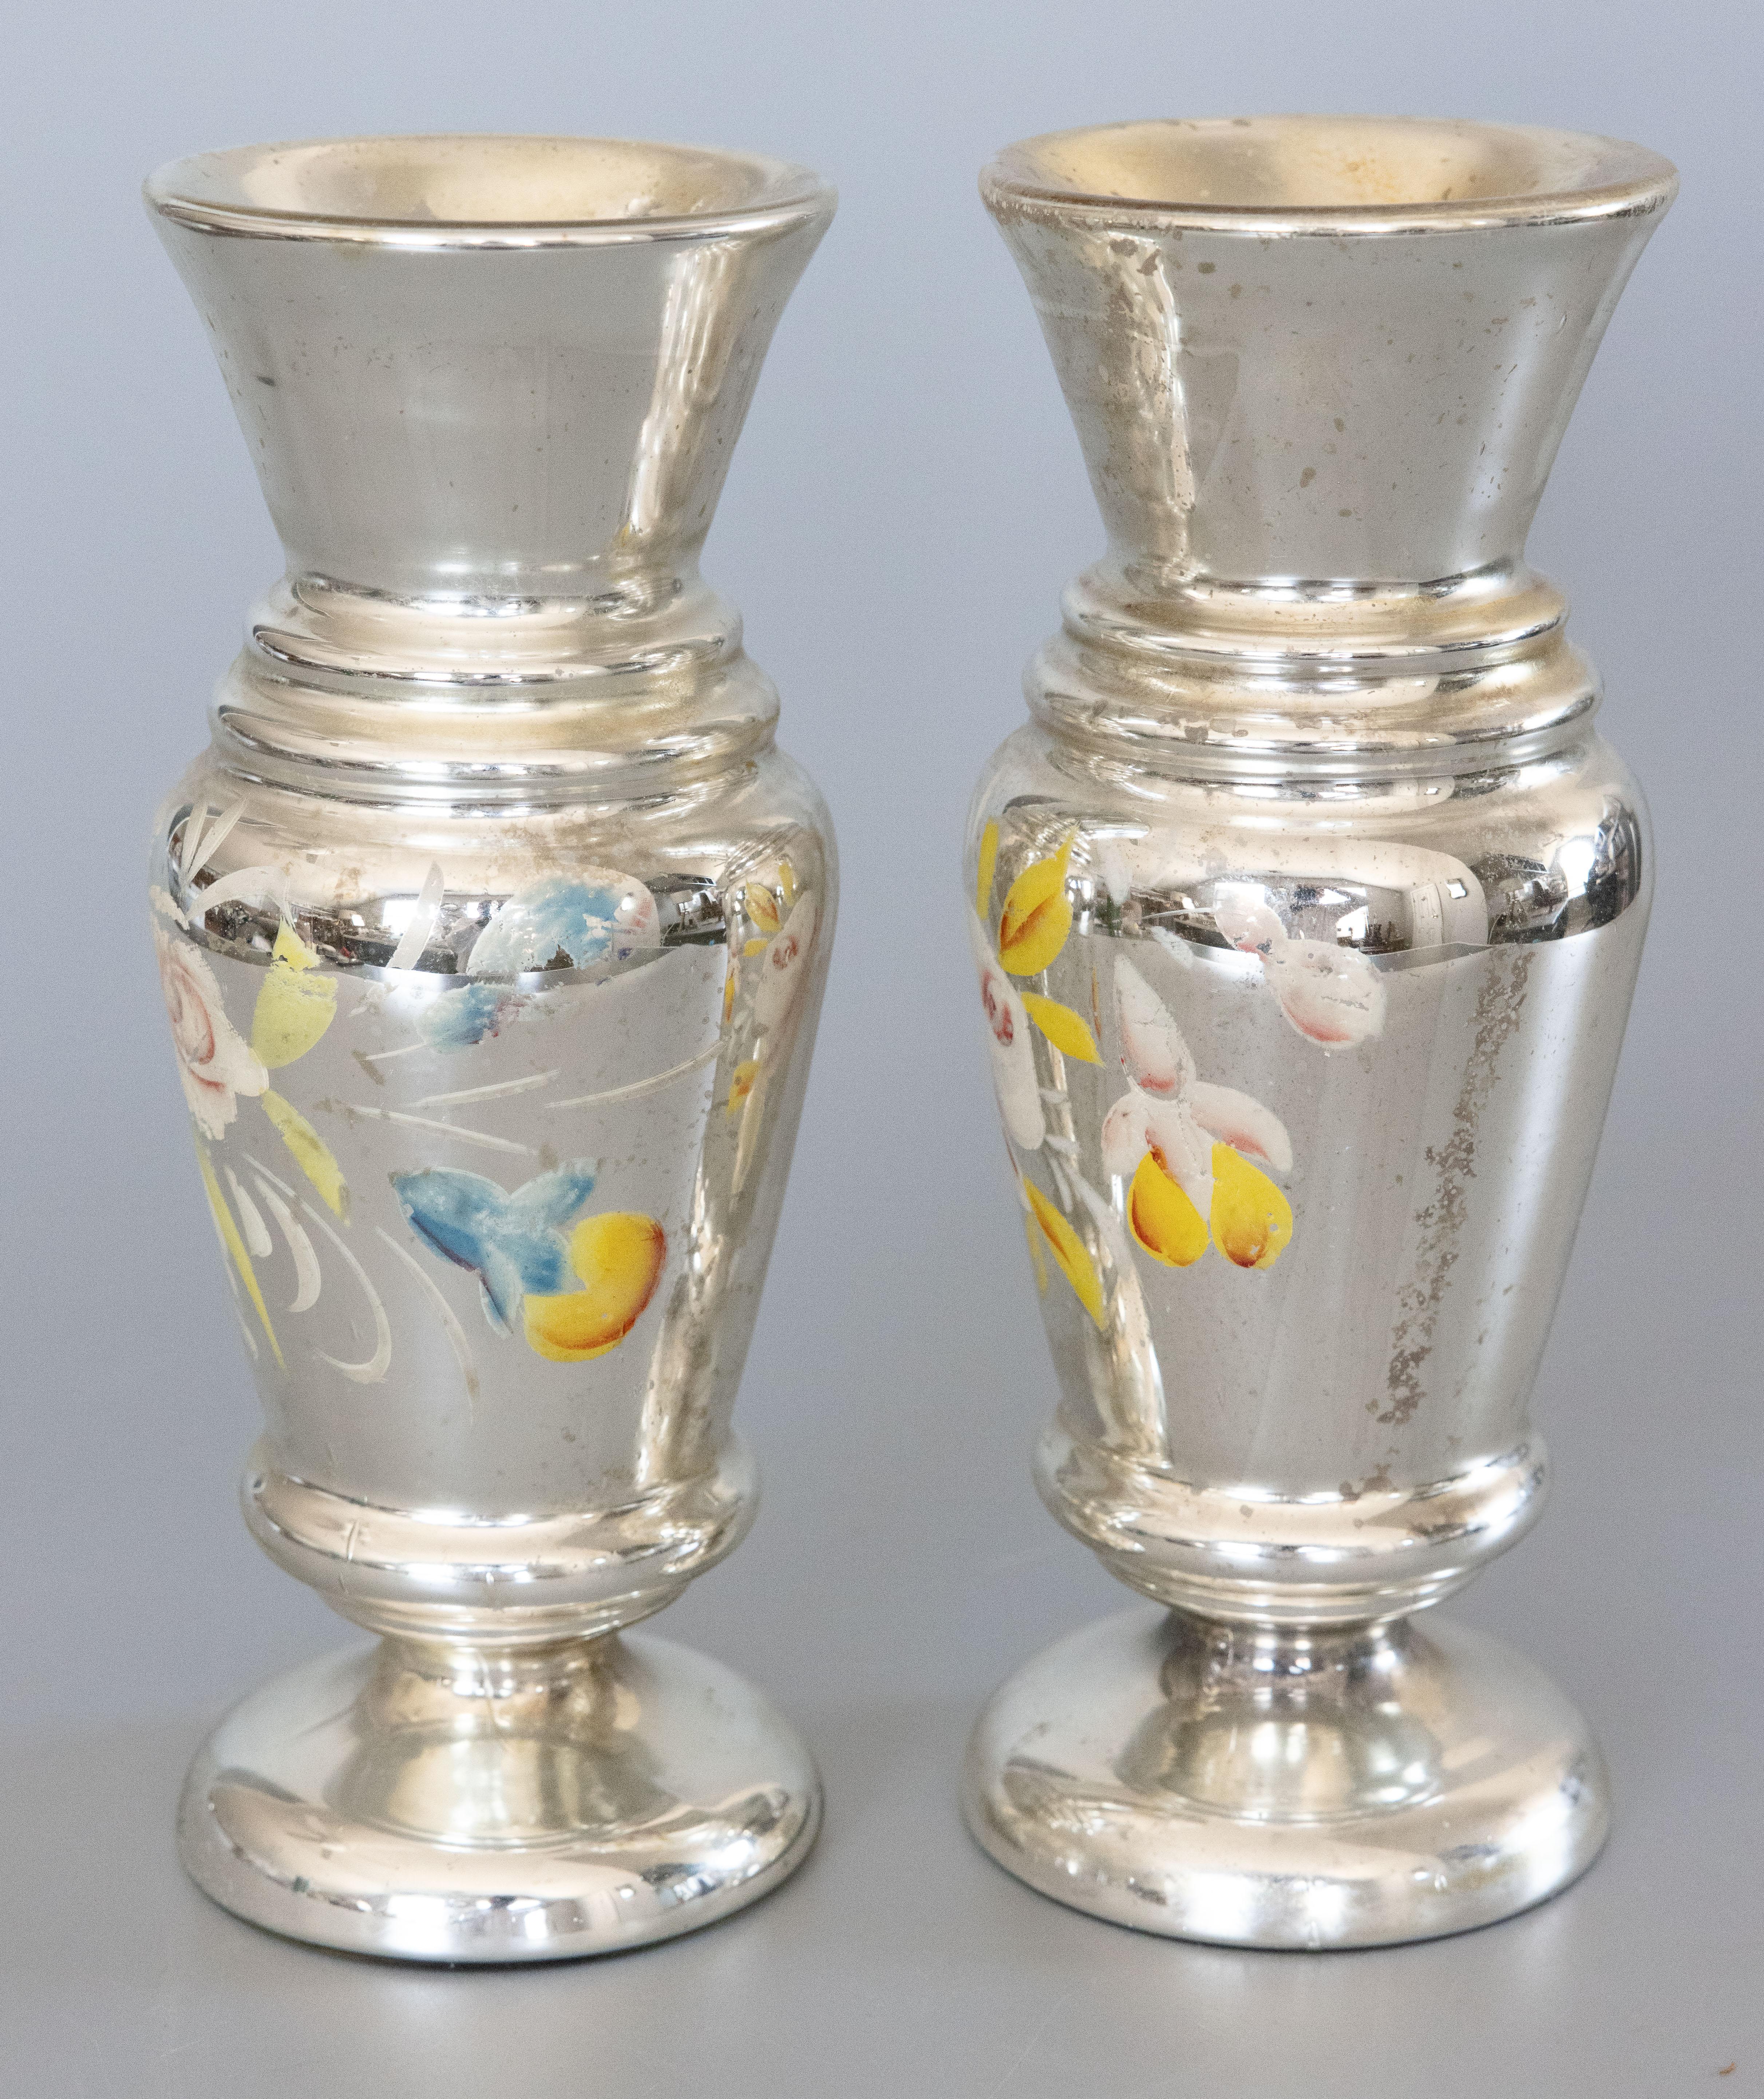 A lovely large pair of authentic antique 19th-Century hand blown mercury glass decorative vases from England. These stunning vases have stylish shapes with hand painted floral designs in a beautiful patina and would be the perfect room accent